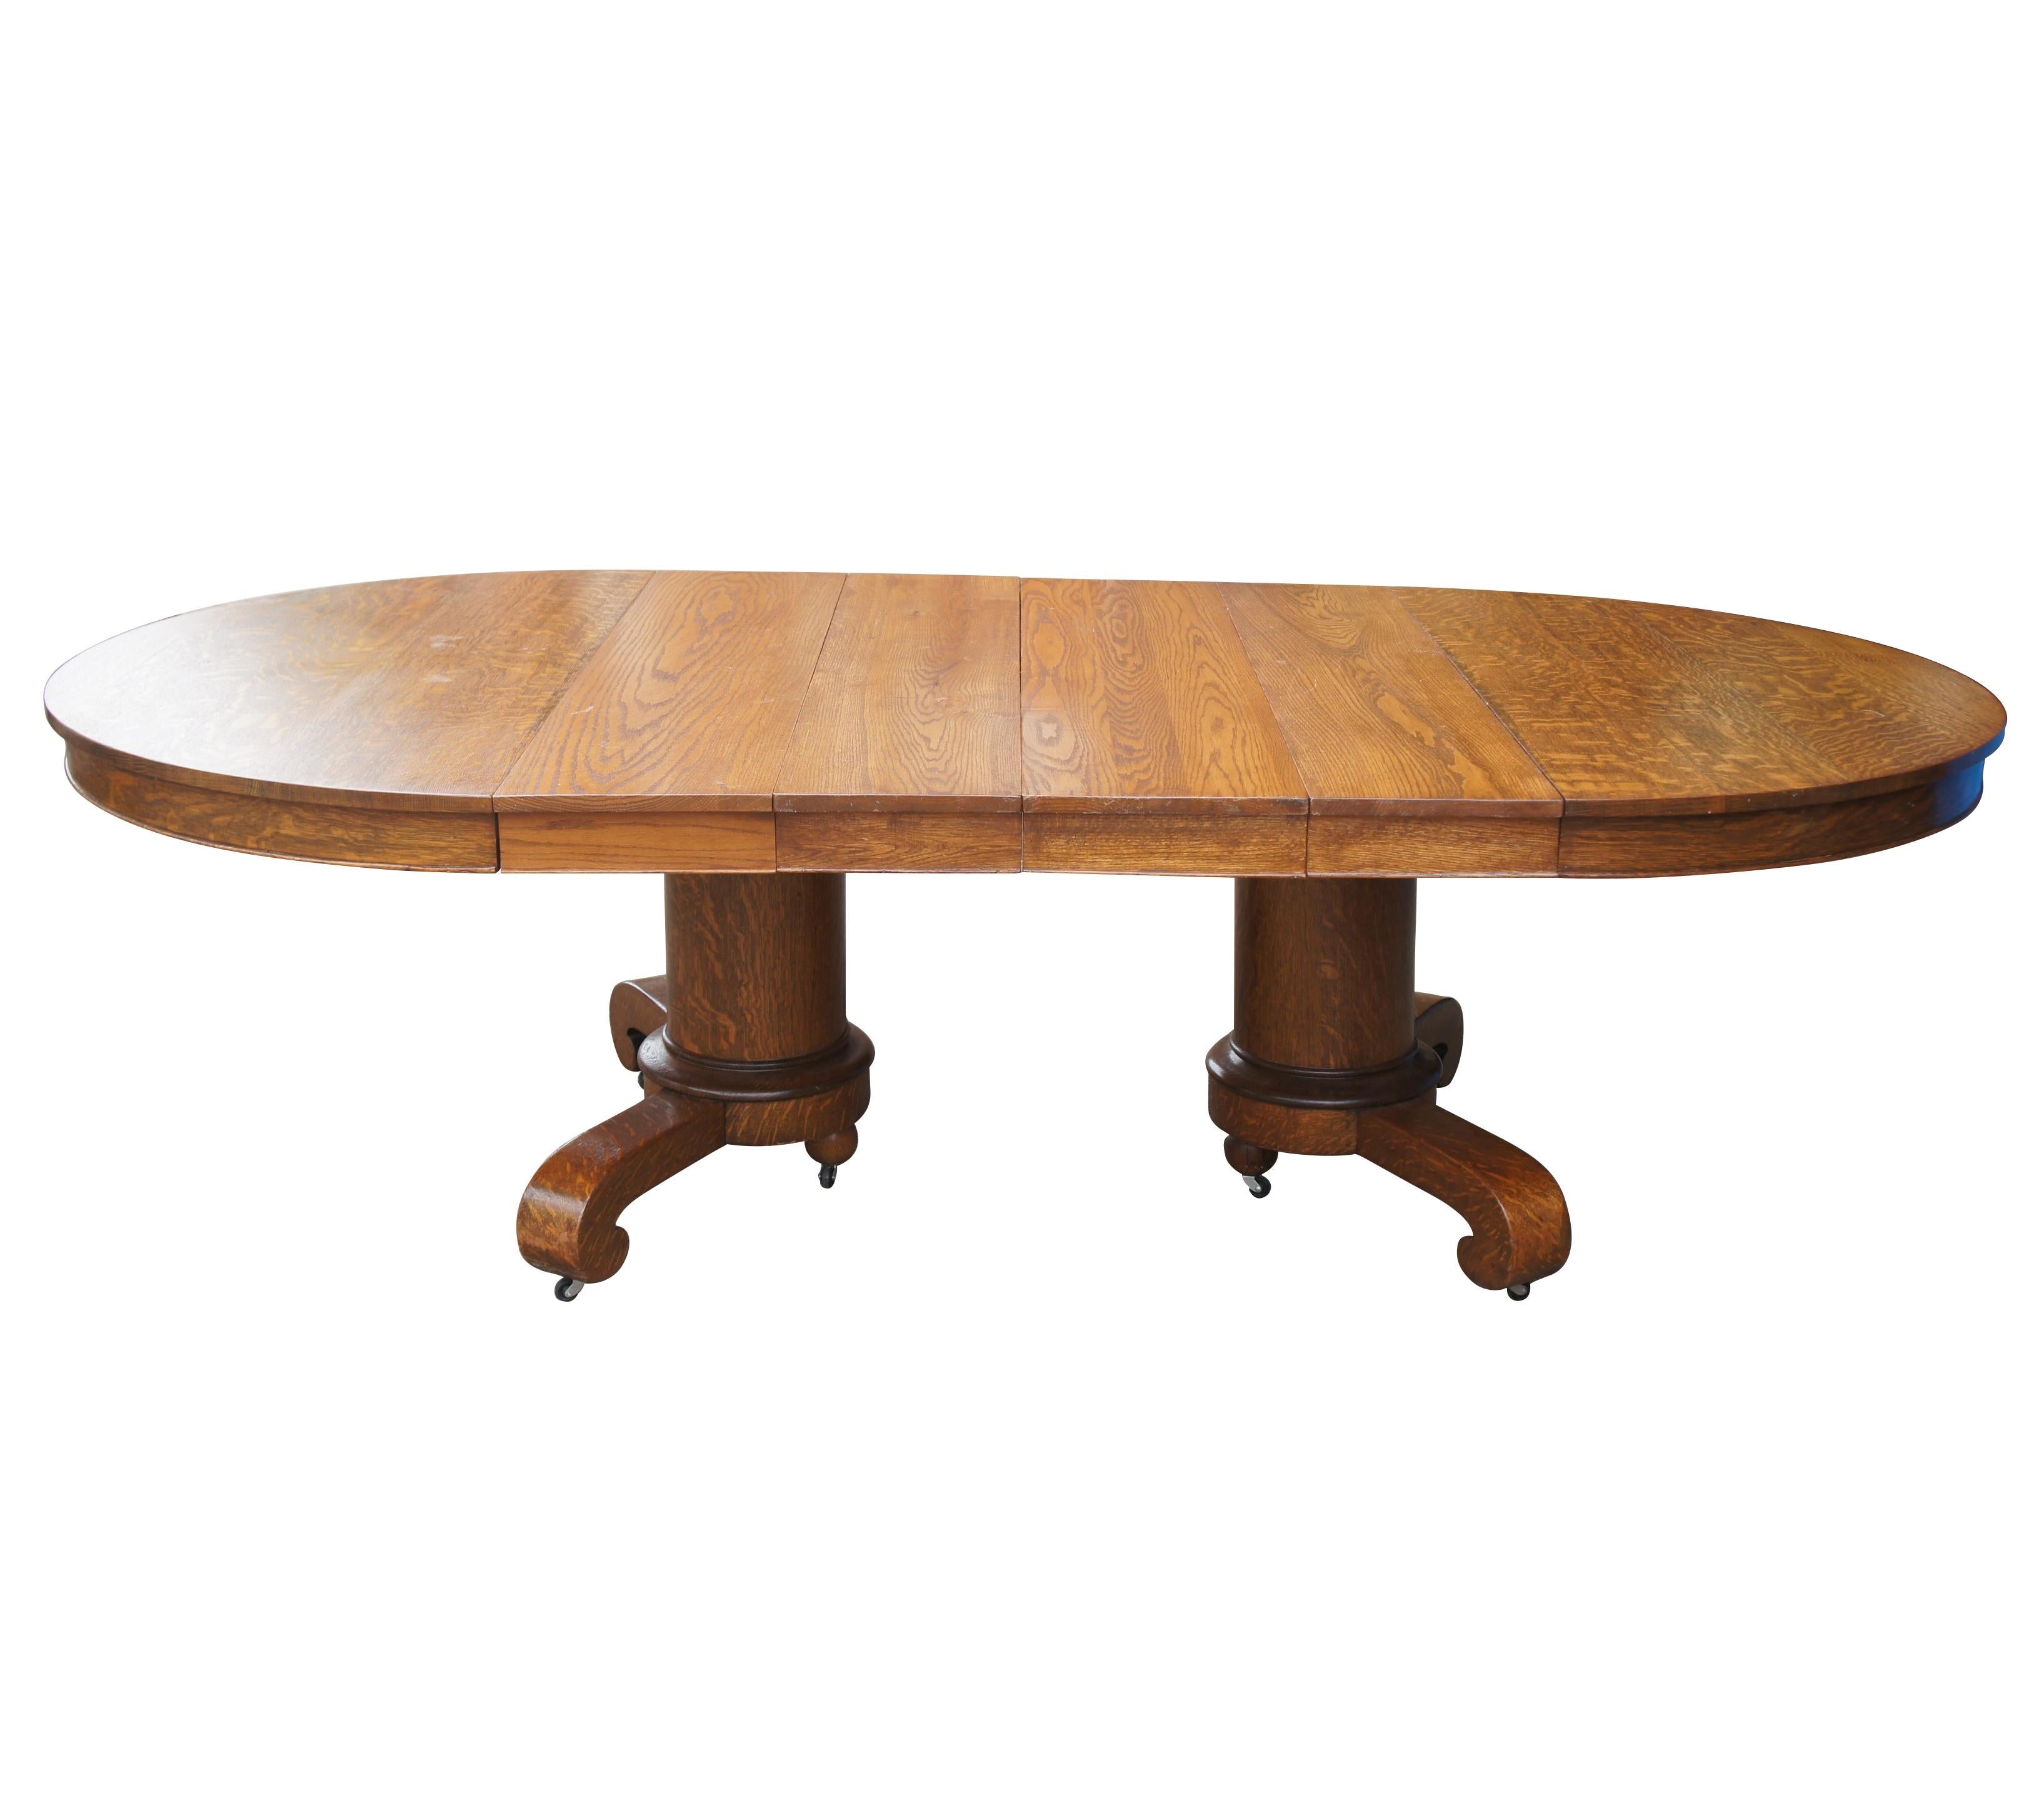 Late 19th century American Empire / Mission double pedestal dining table.  Made from Quartersawn Oak.  Features an extendable oval top over thick cylindrical pedestal bases with scrolled feet.  Includes 4 leaves for extension.  Table is on casters